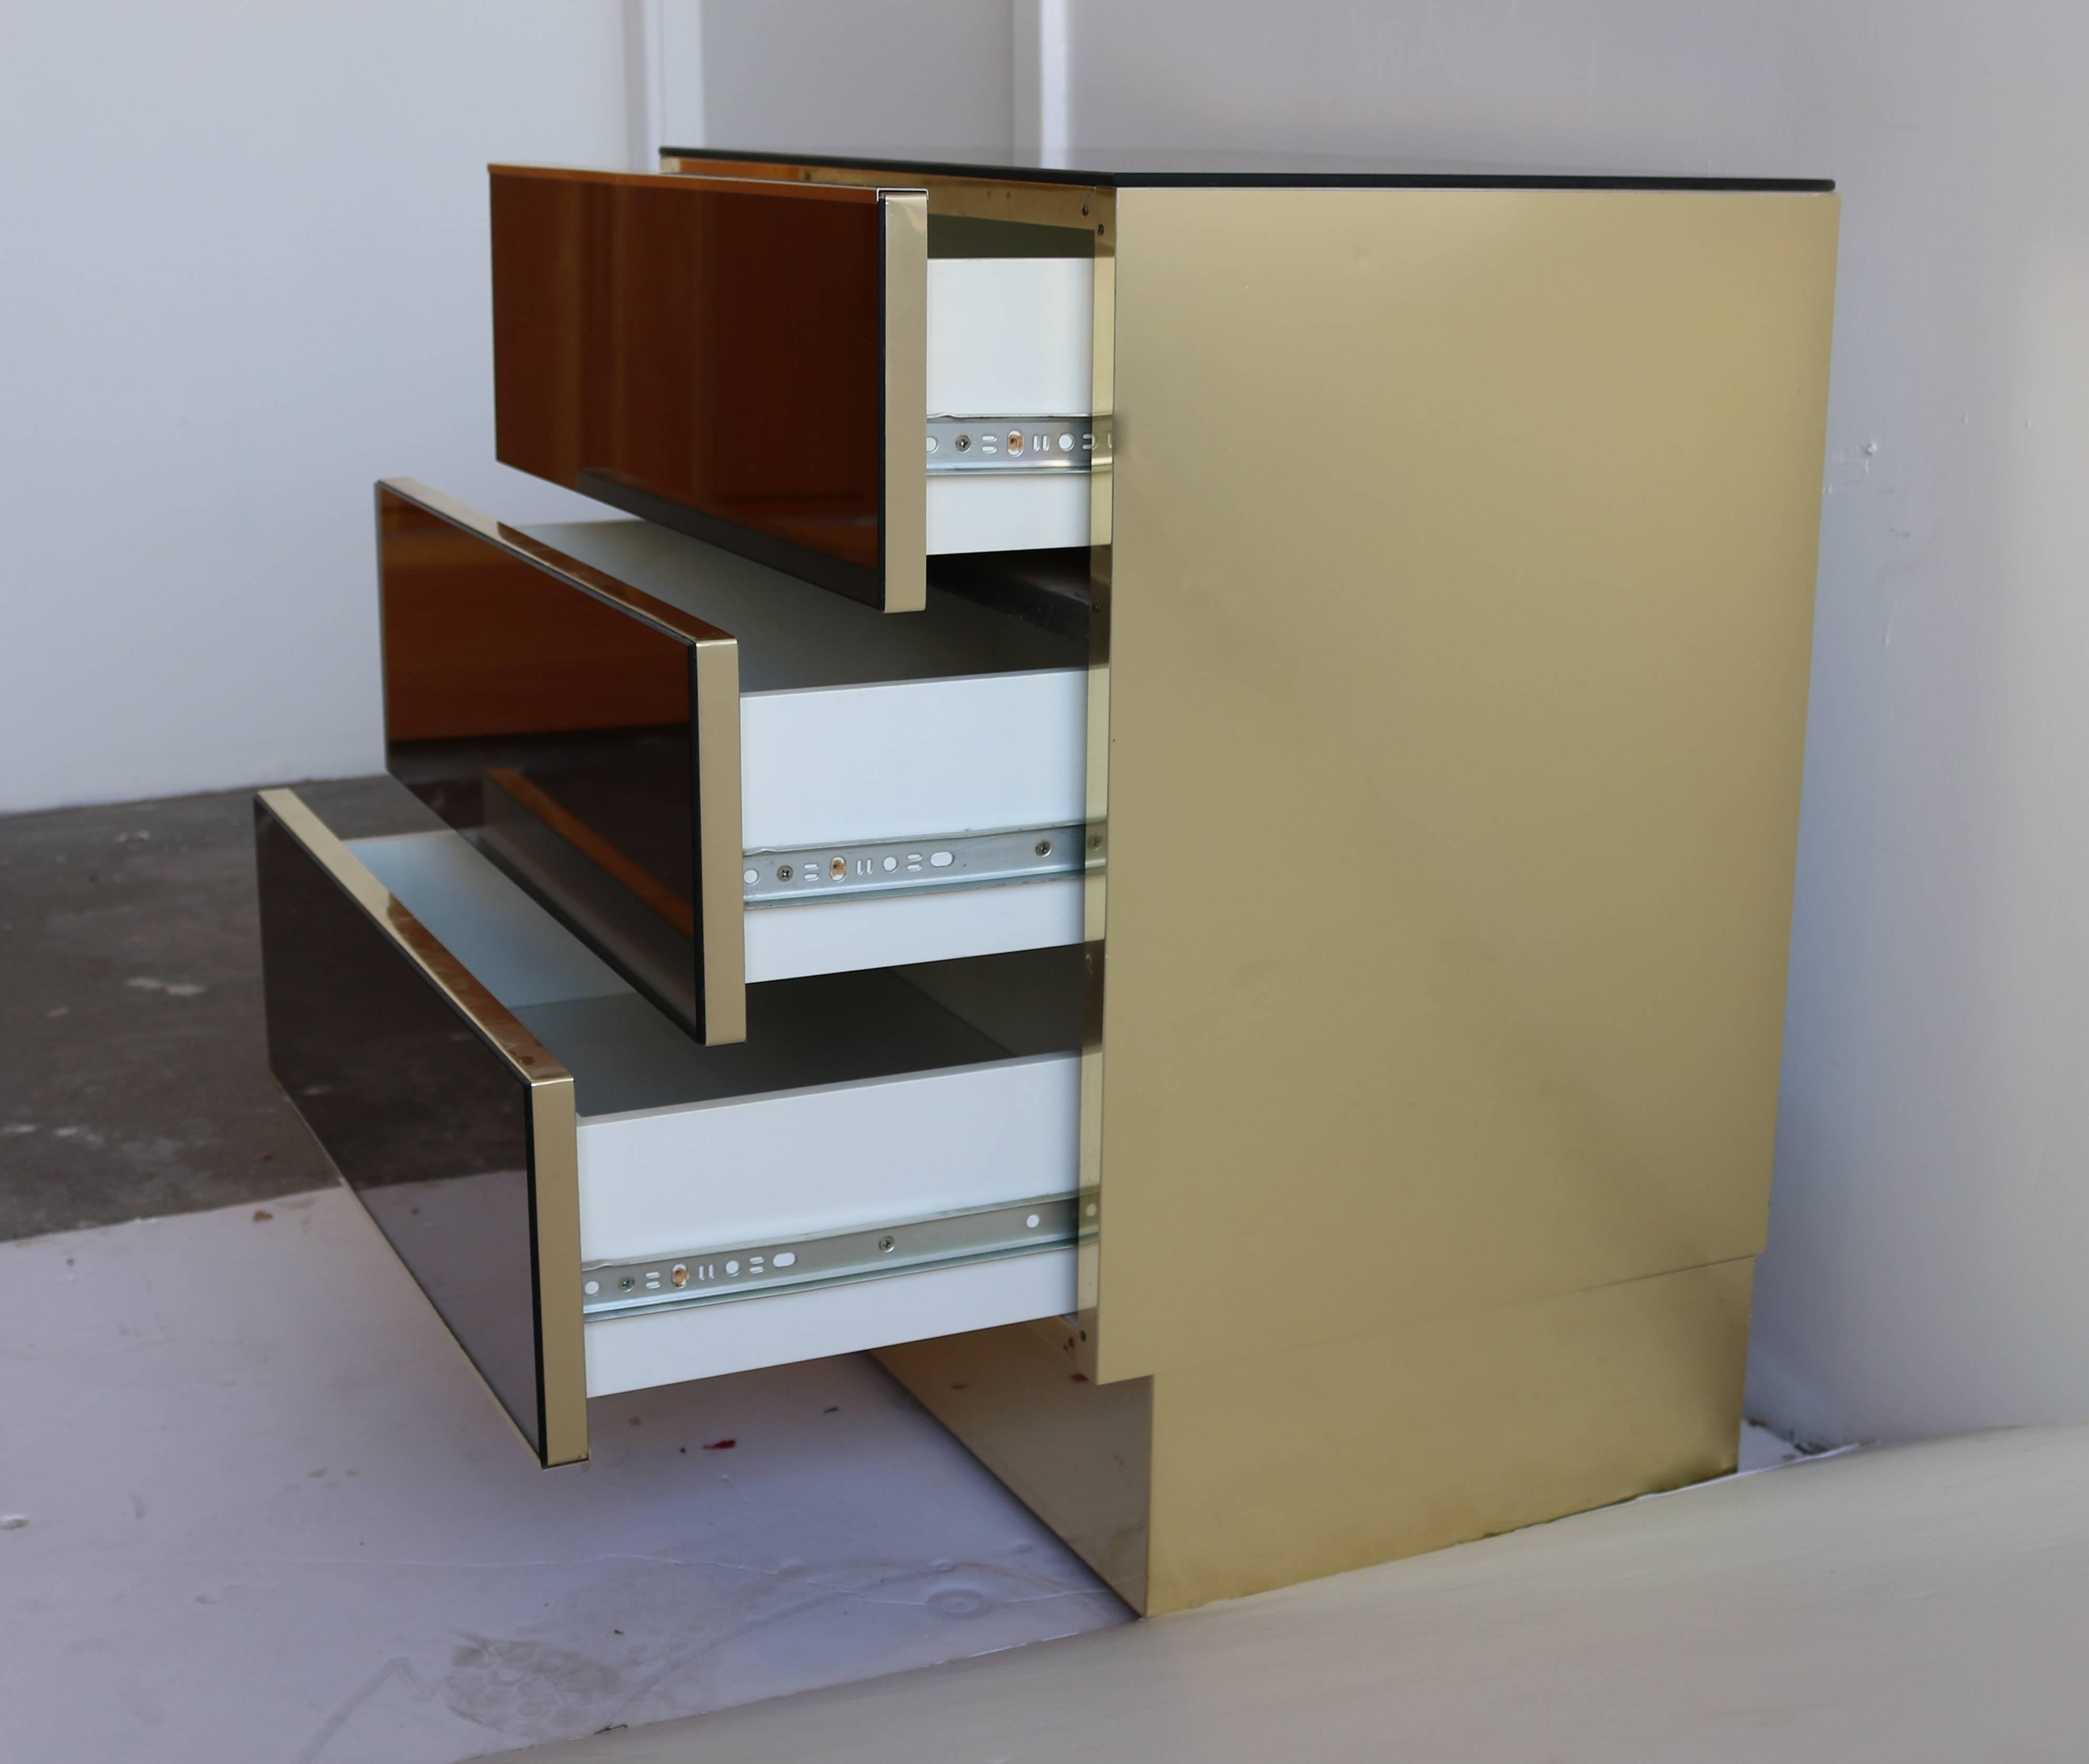 Beautiful pair of vintage Ello three-drawer nightstands, circa early 1970s. These rectangular stands havesmoked mirror face drawers and top, and brass paneled sides.